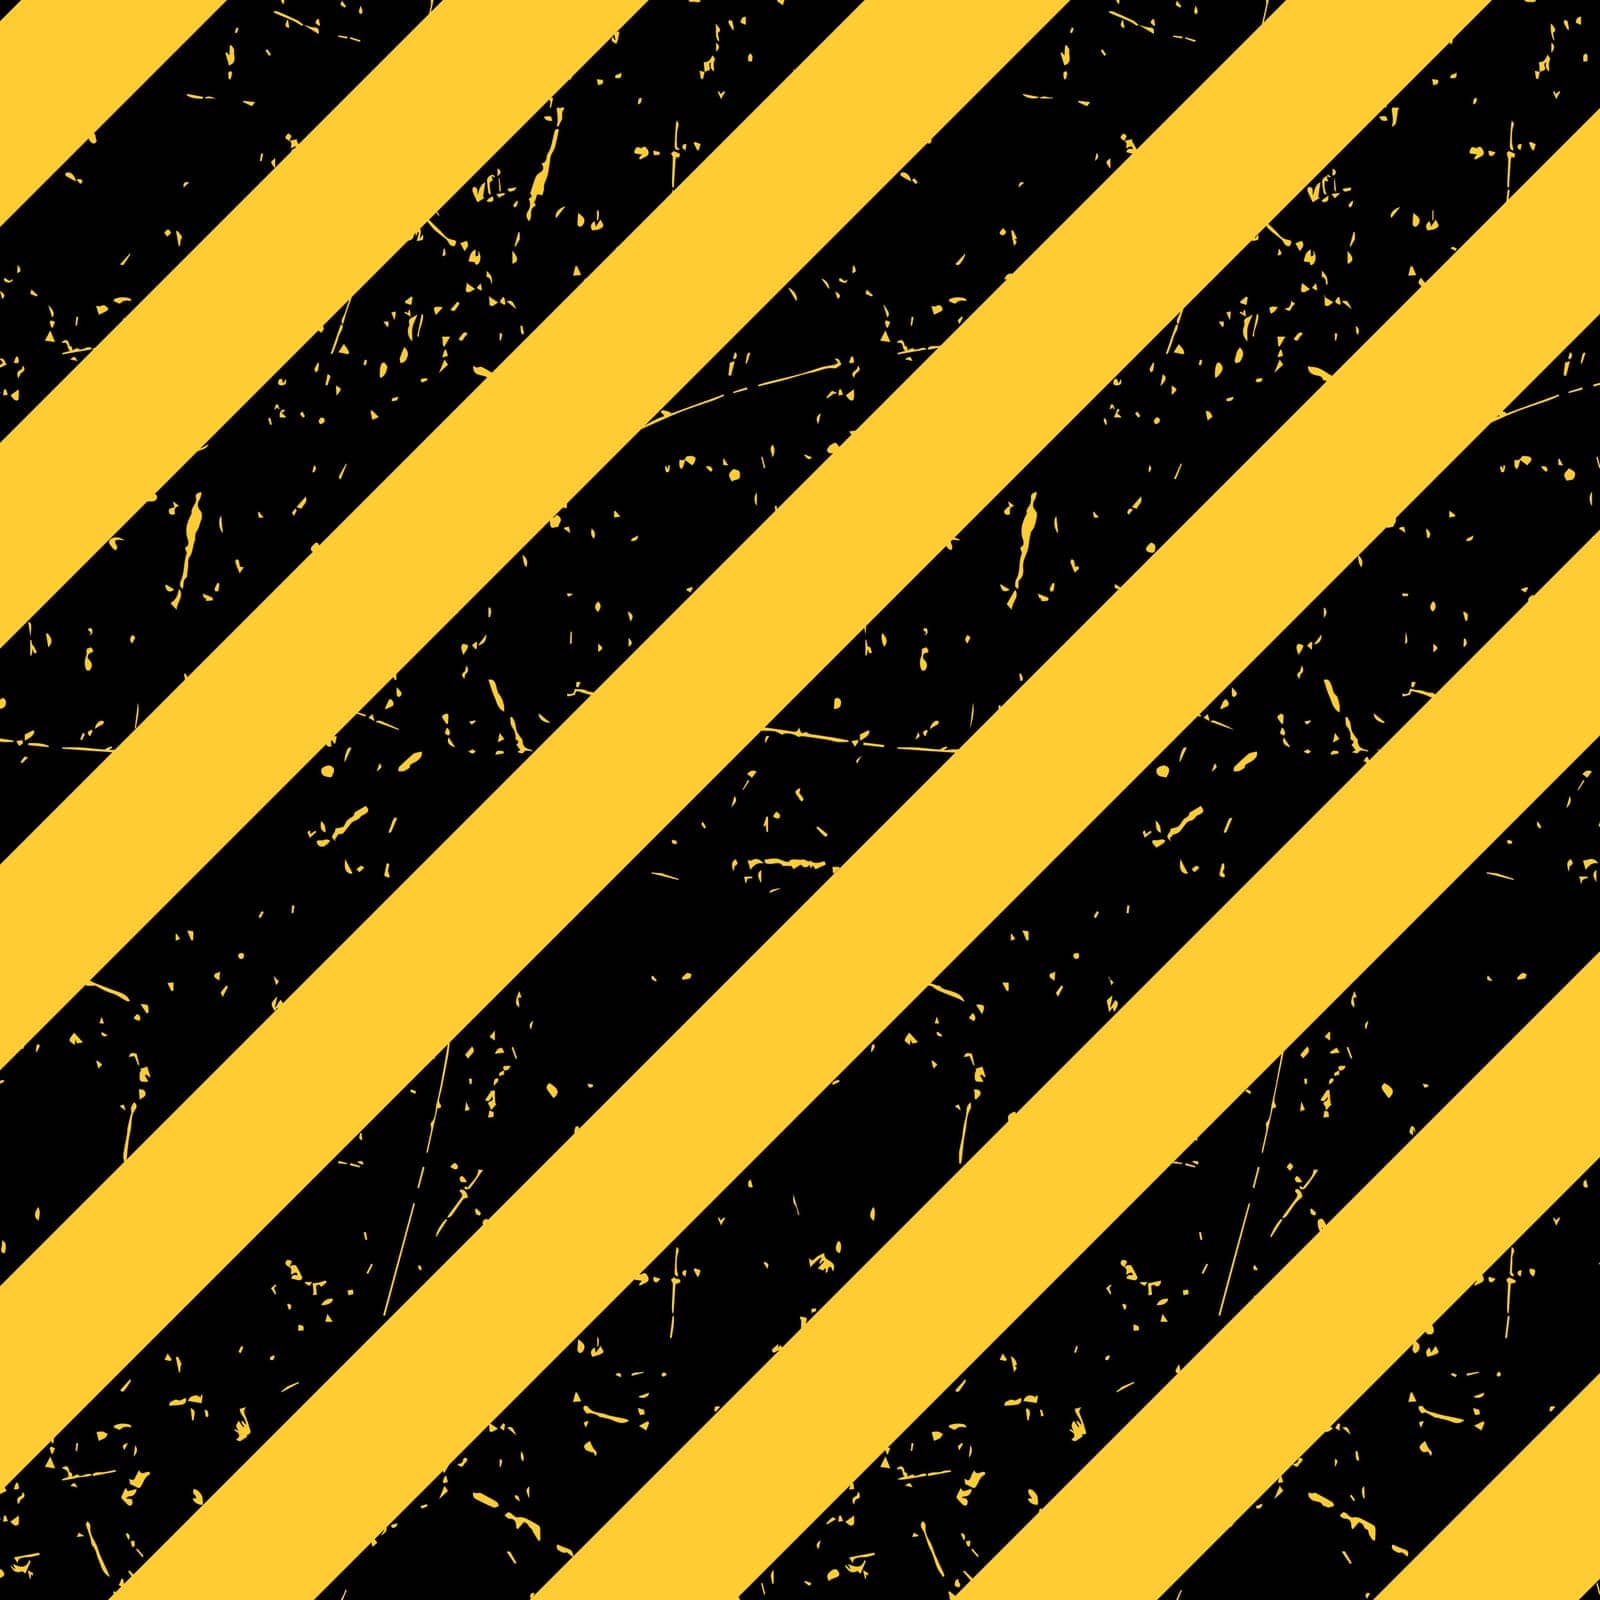 Black and yellow background with scuffs. Striped background with grunge texture. Vector illustration.